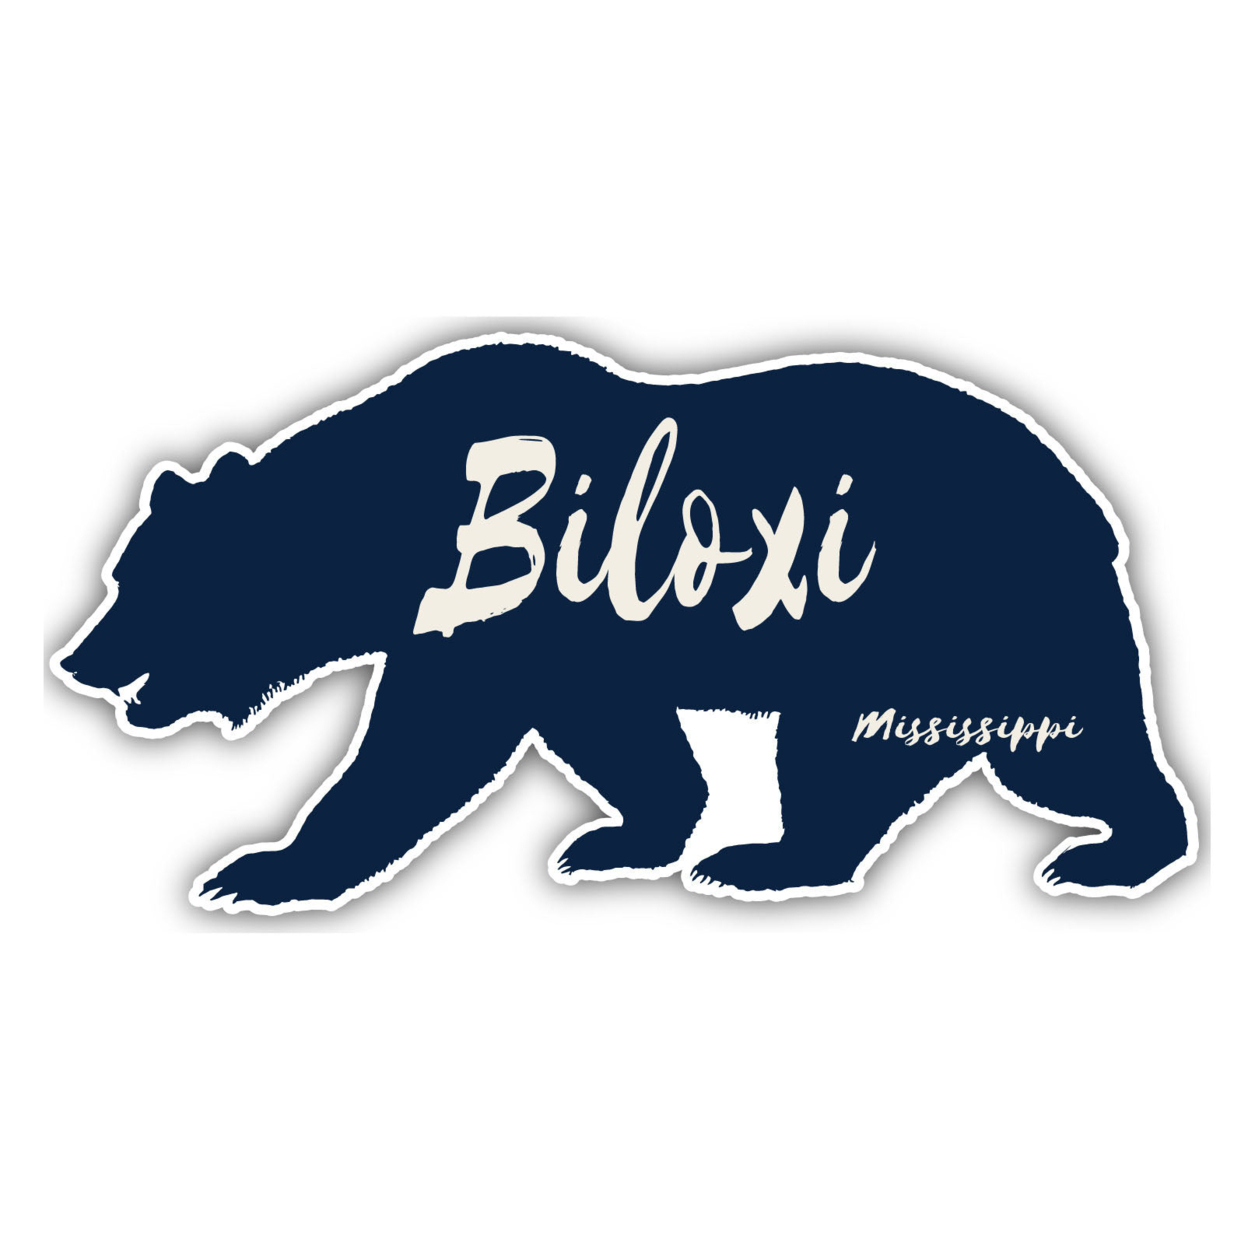 Biloxi Mississippi Souvenir Decorative Stickers (Choose Theme And Size) - 4-Pack, 8-Inch, Camp Life